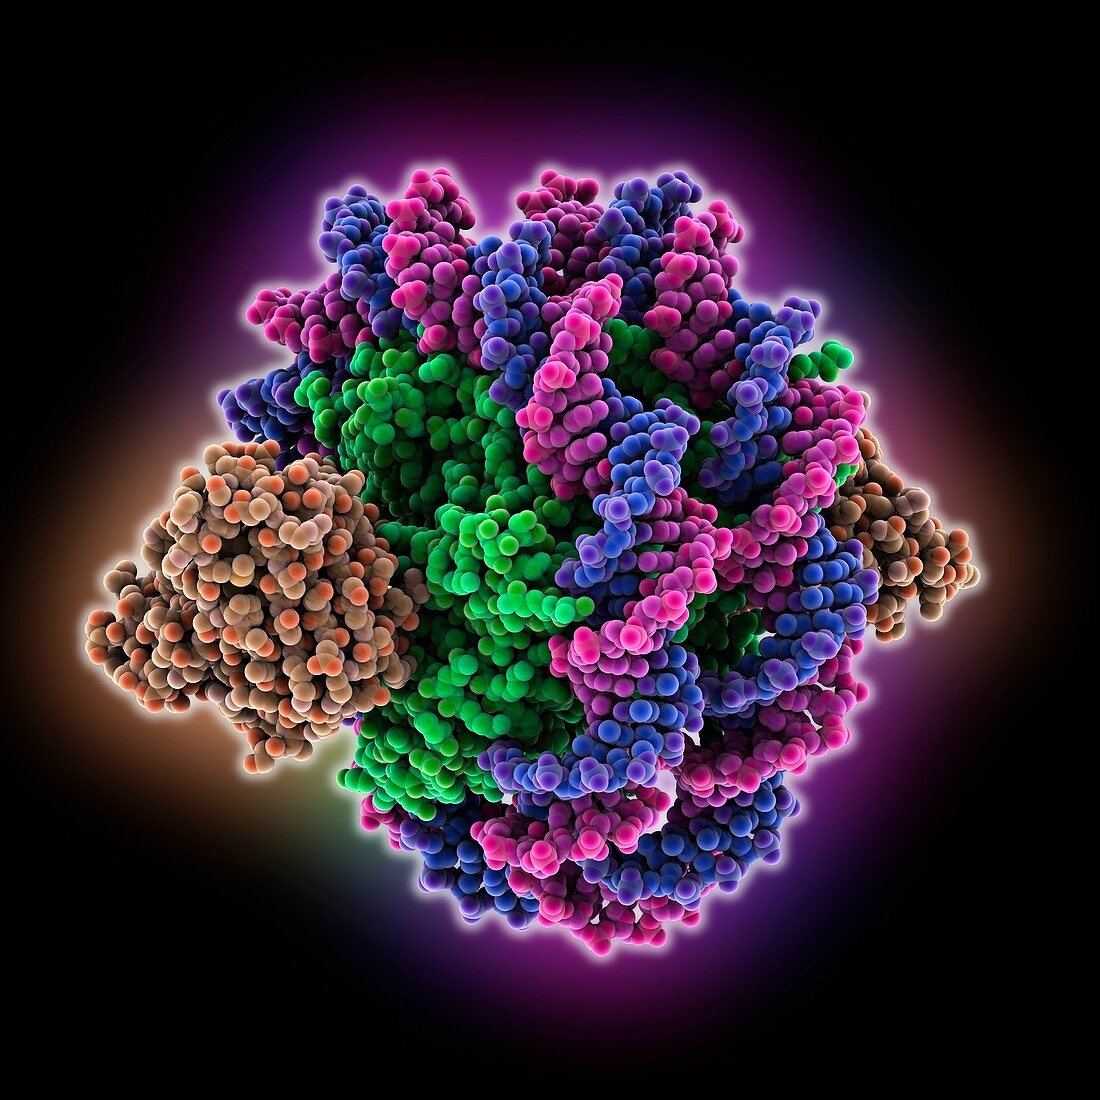 Yeast nucleosome complexed with antibody, molecular model